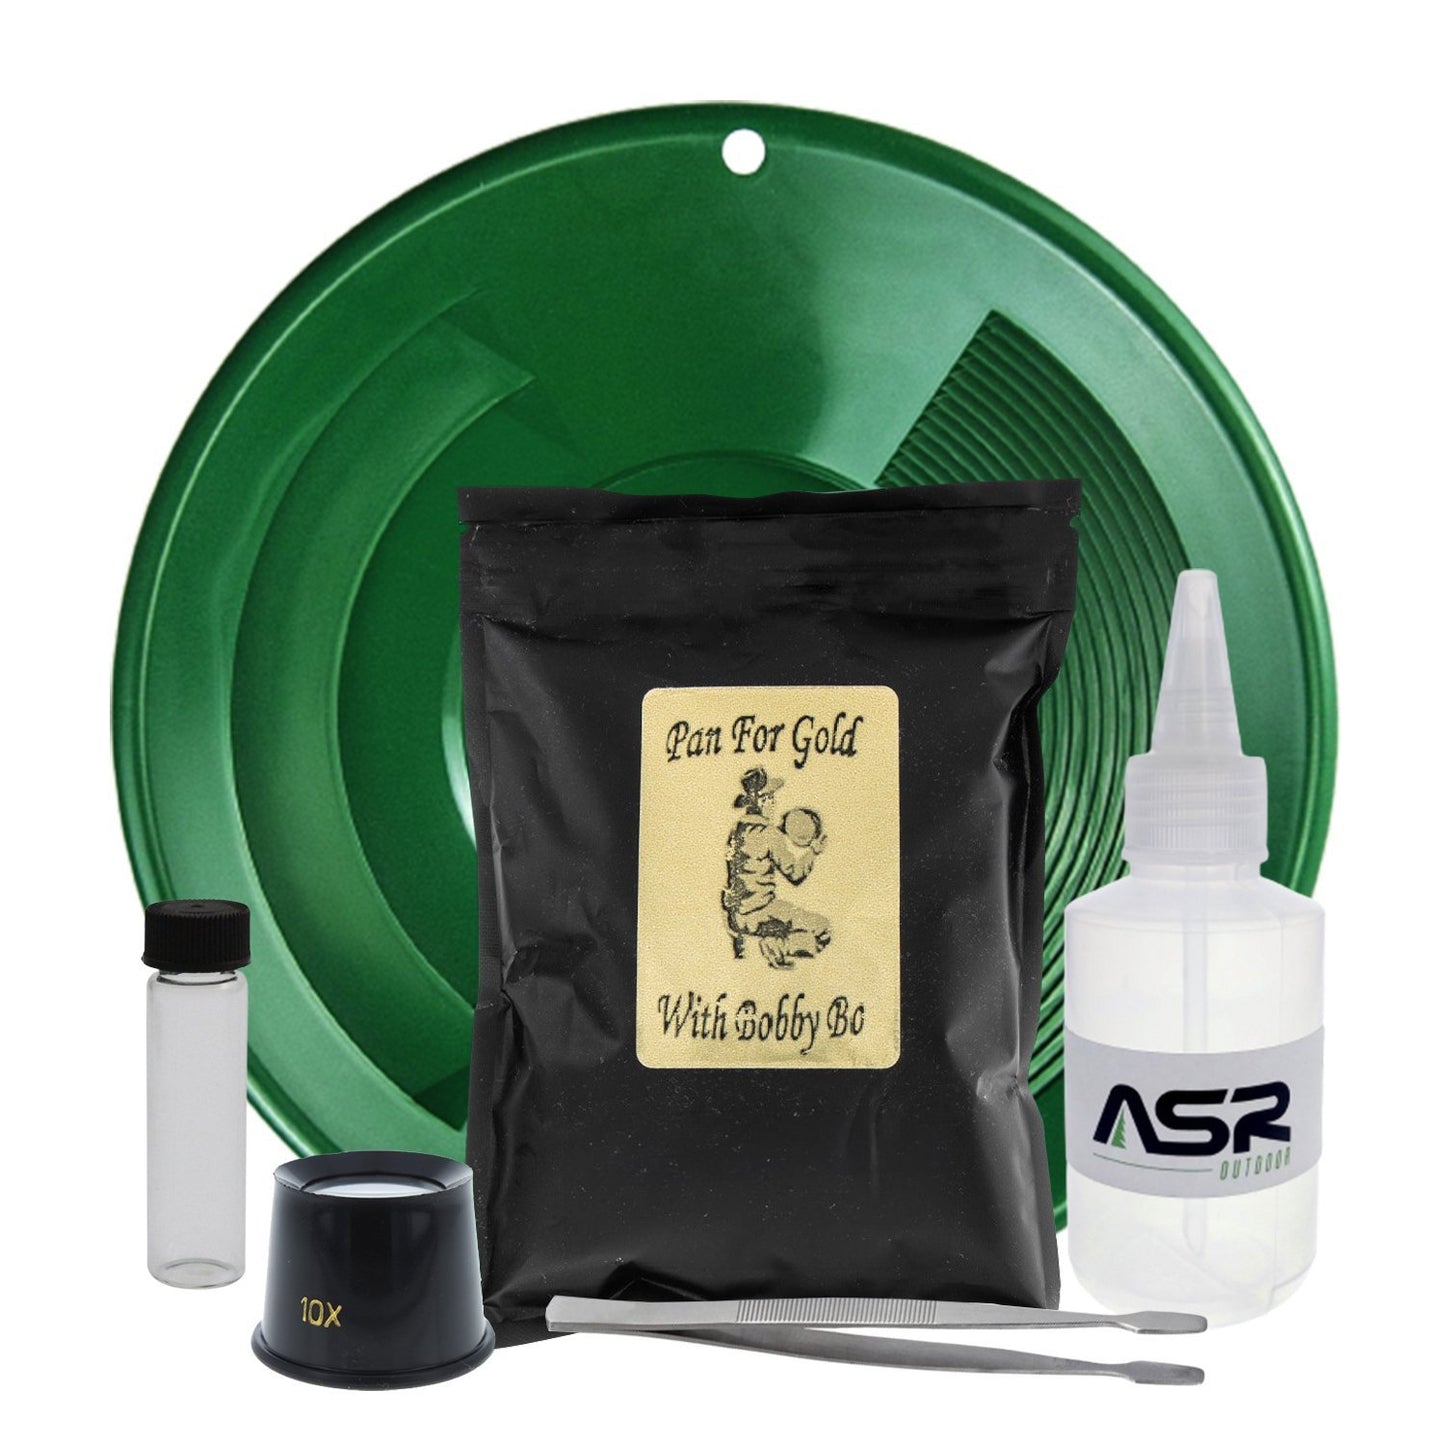 ASR Outdoor X Pan for Gold with Bobby Bo 1lbs Classified Paydirt Gold Panning Kit (3 Colors), 6pc